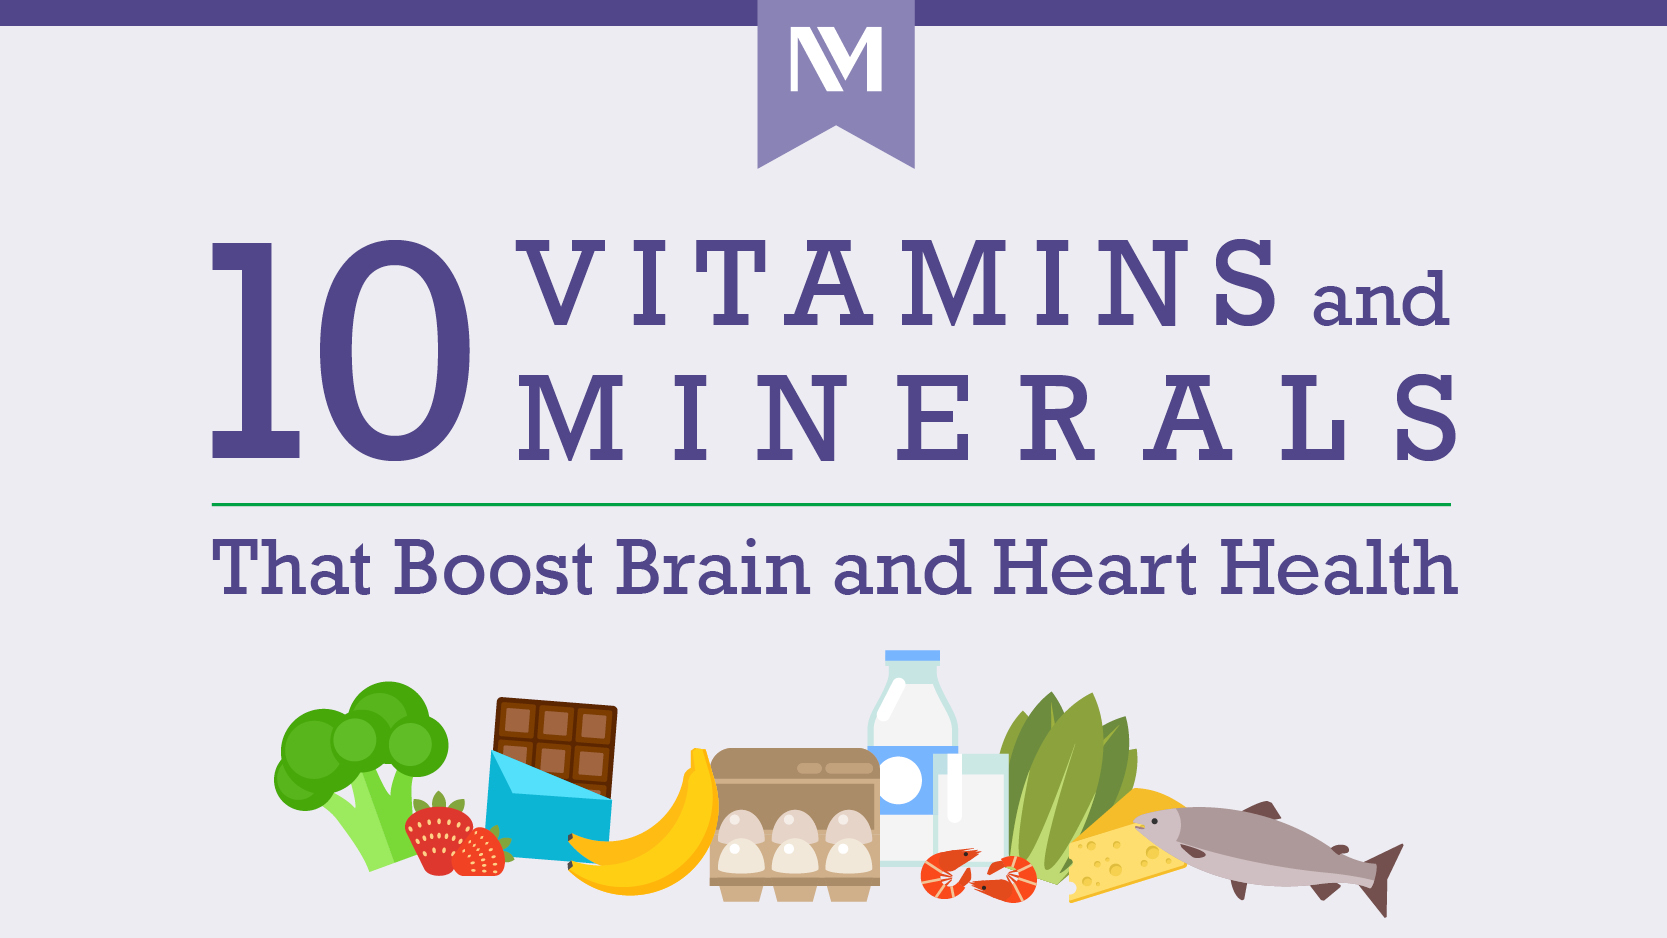 10 Vitamins and Minerals That Boost Brain and Heart Health (Infographic)